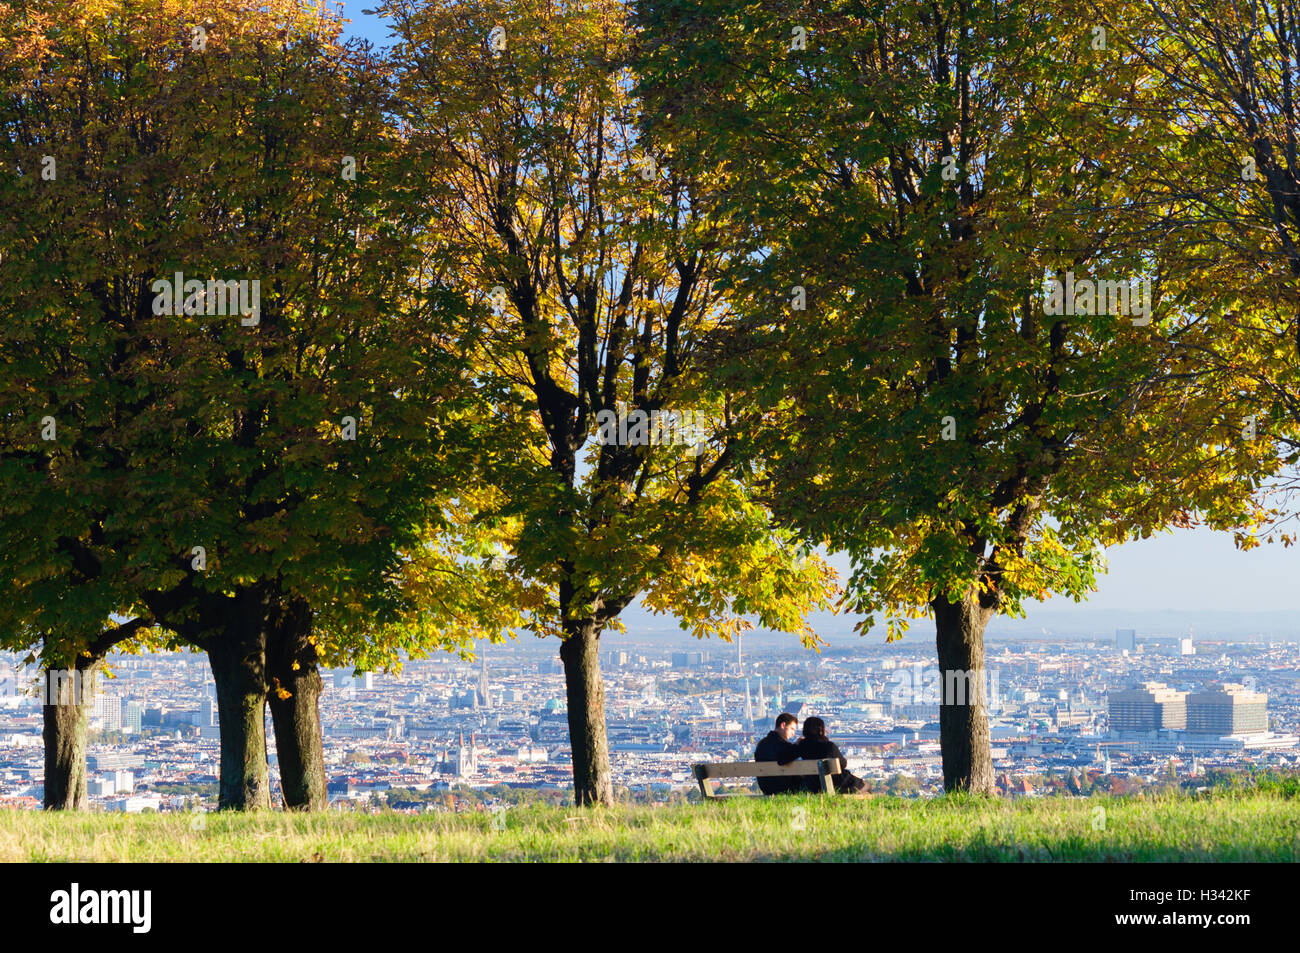 Wien, Vienna: View of Vienna from the Hill 'Himmel“, young couple at park bench, 00., Wien, Austria Stock Photo